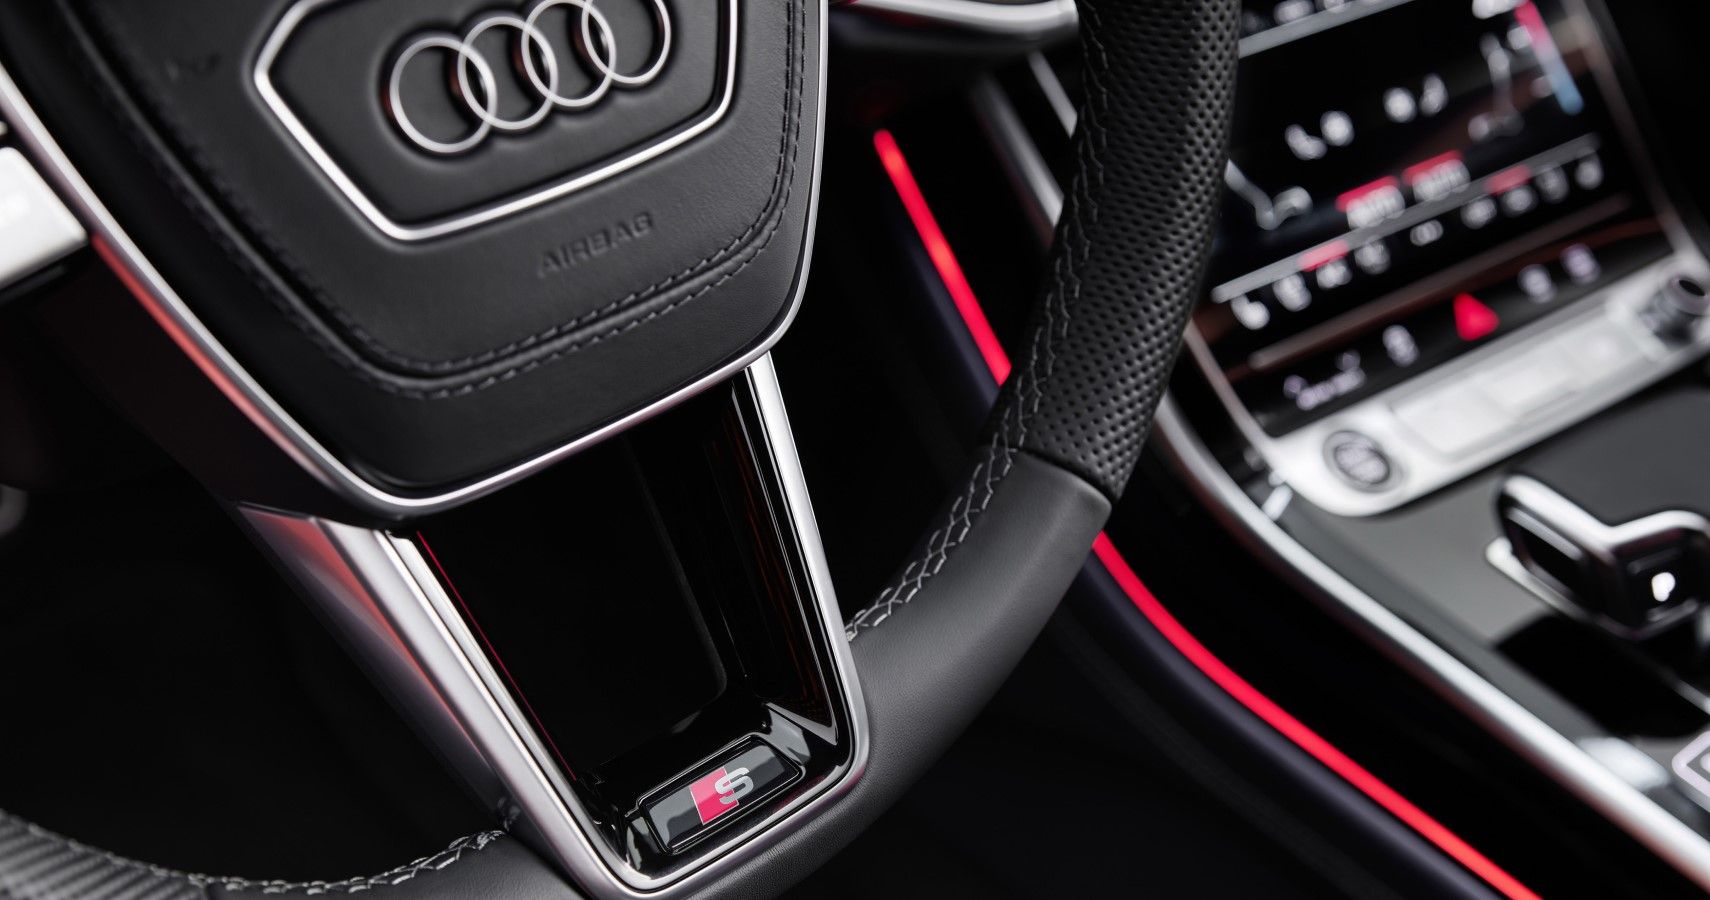 2022 Audi A8 S-line badging on the steering wheel